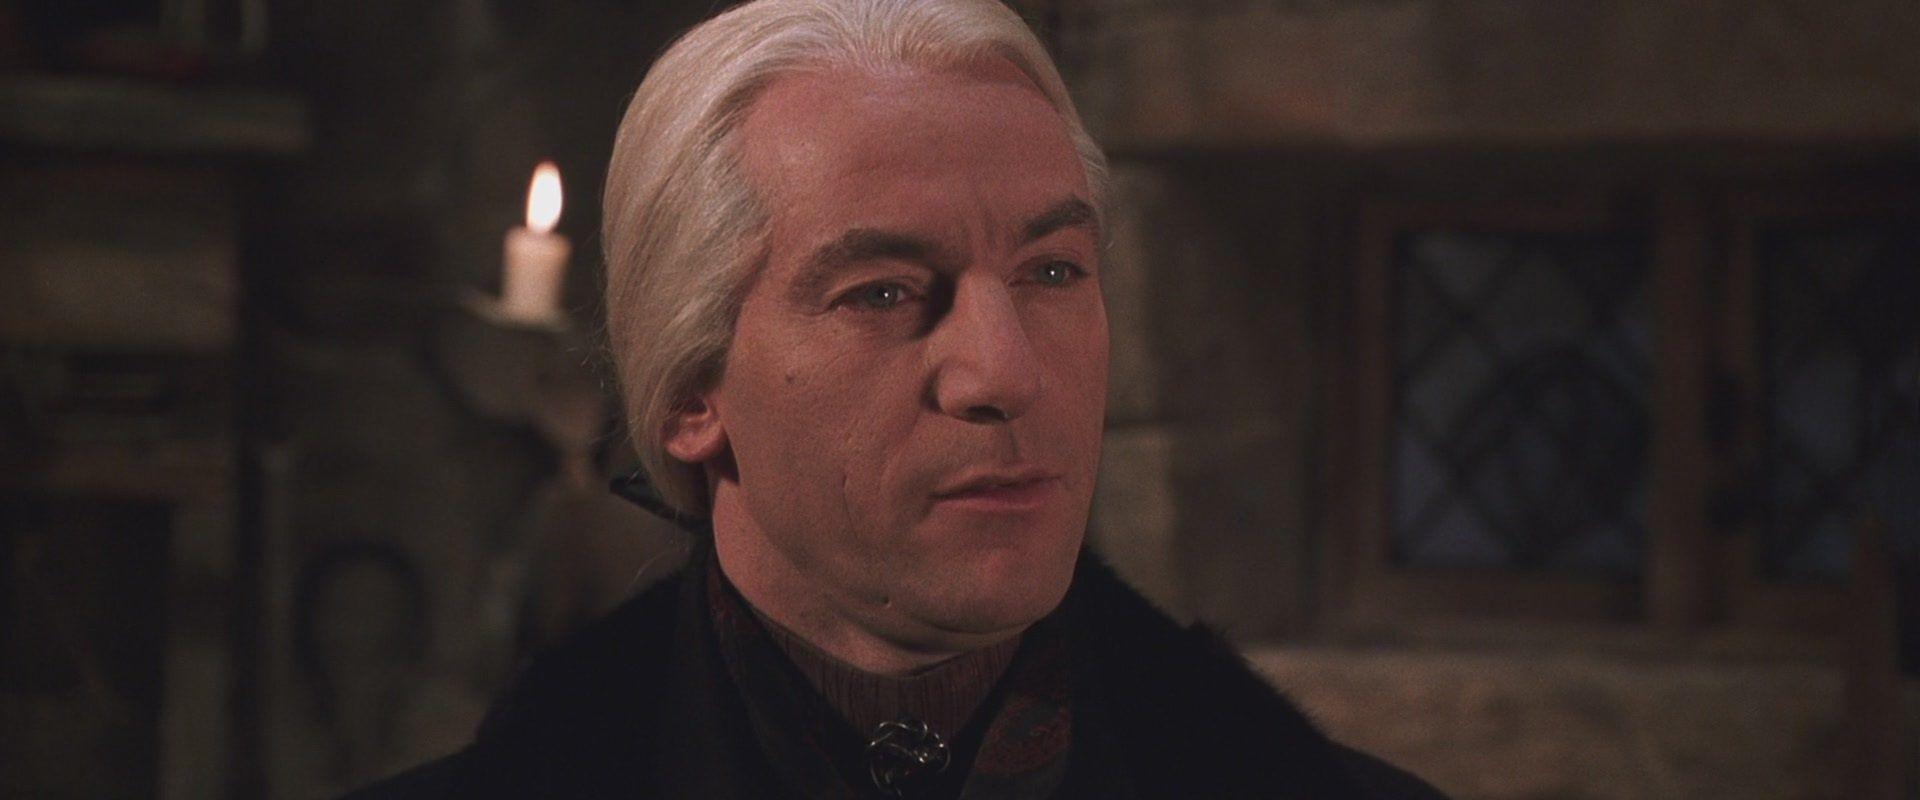 jason isaacs as lucius malfoy. Lucius Malfoy image Lucius in COS